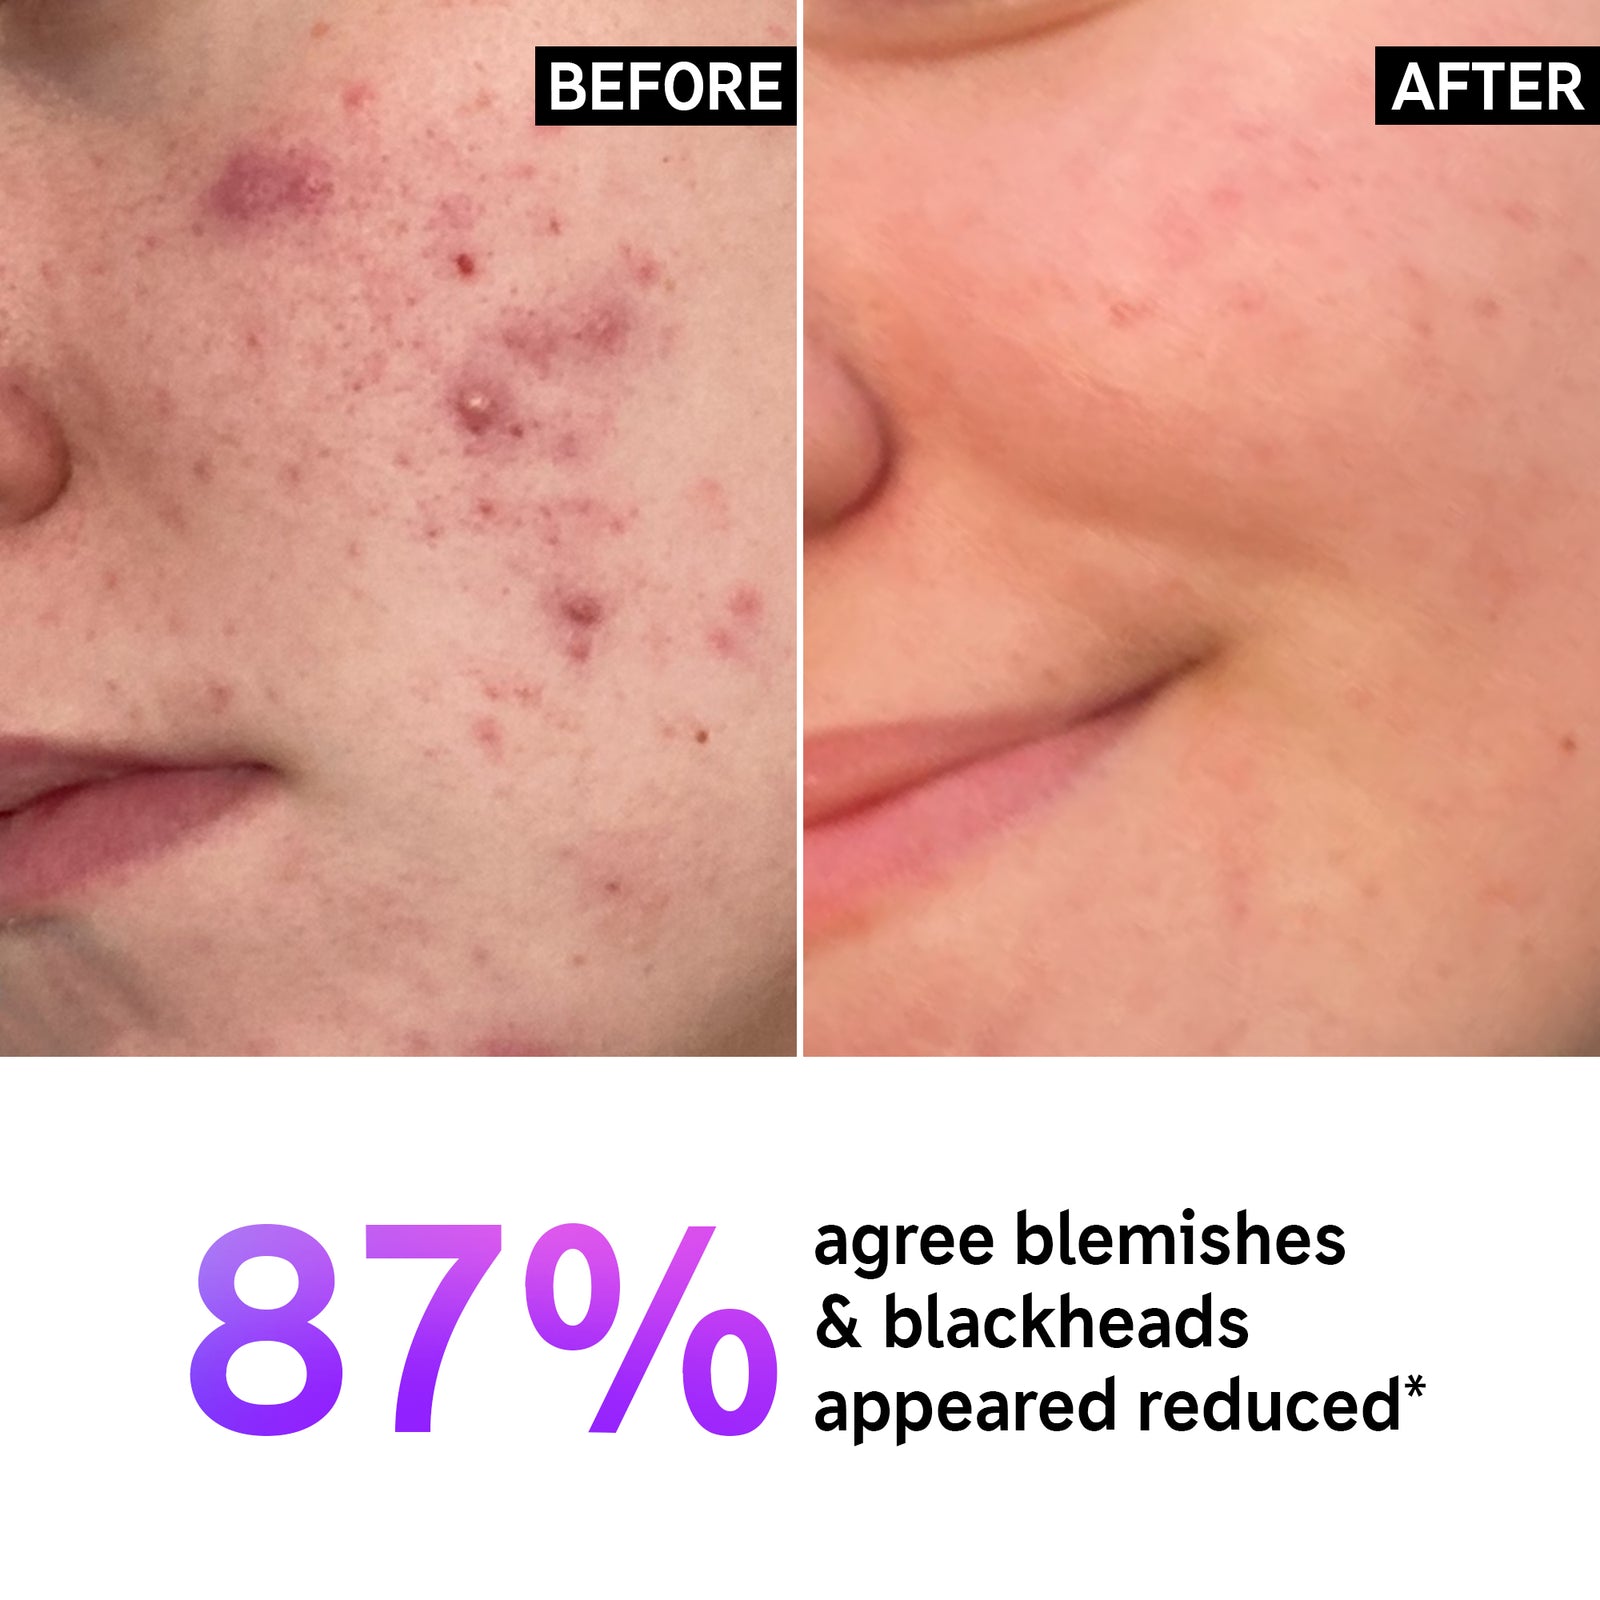 Supersize Salicylic Acid Cleanser Duo before and after side by side image of visible results after a period of time with key claim statistic